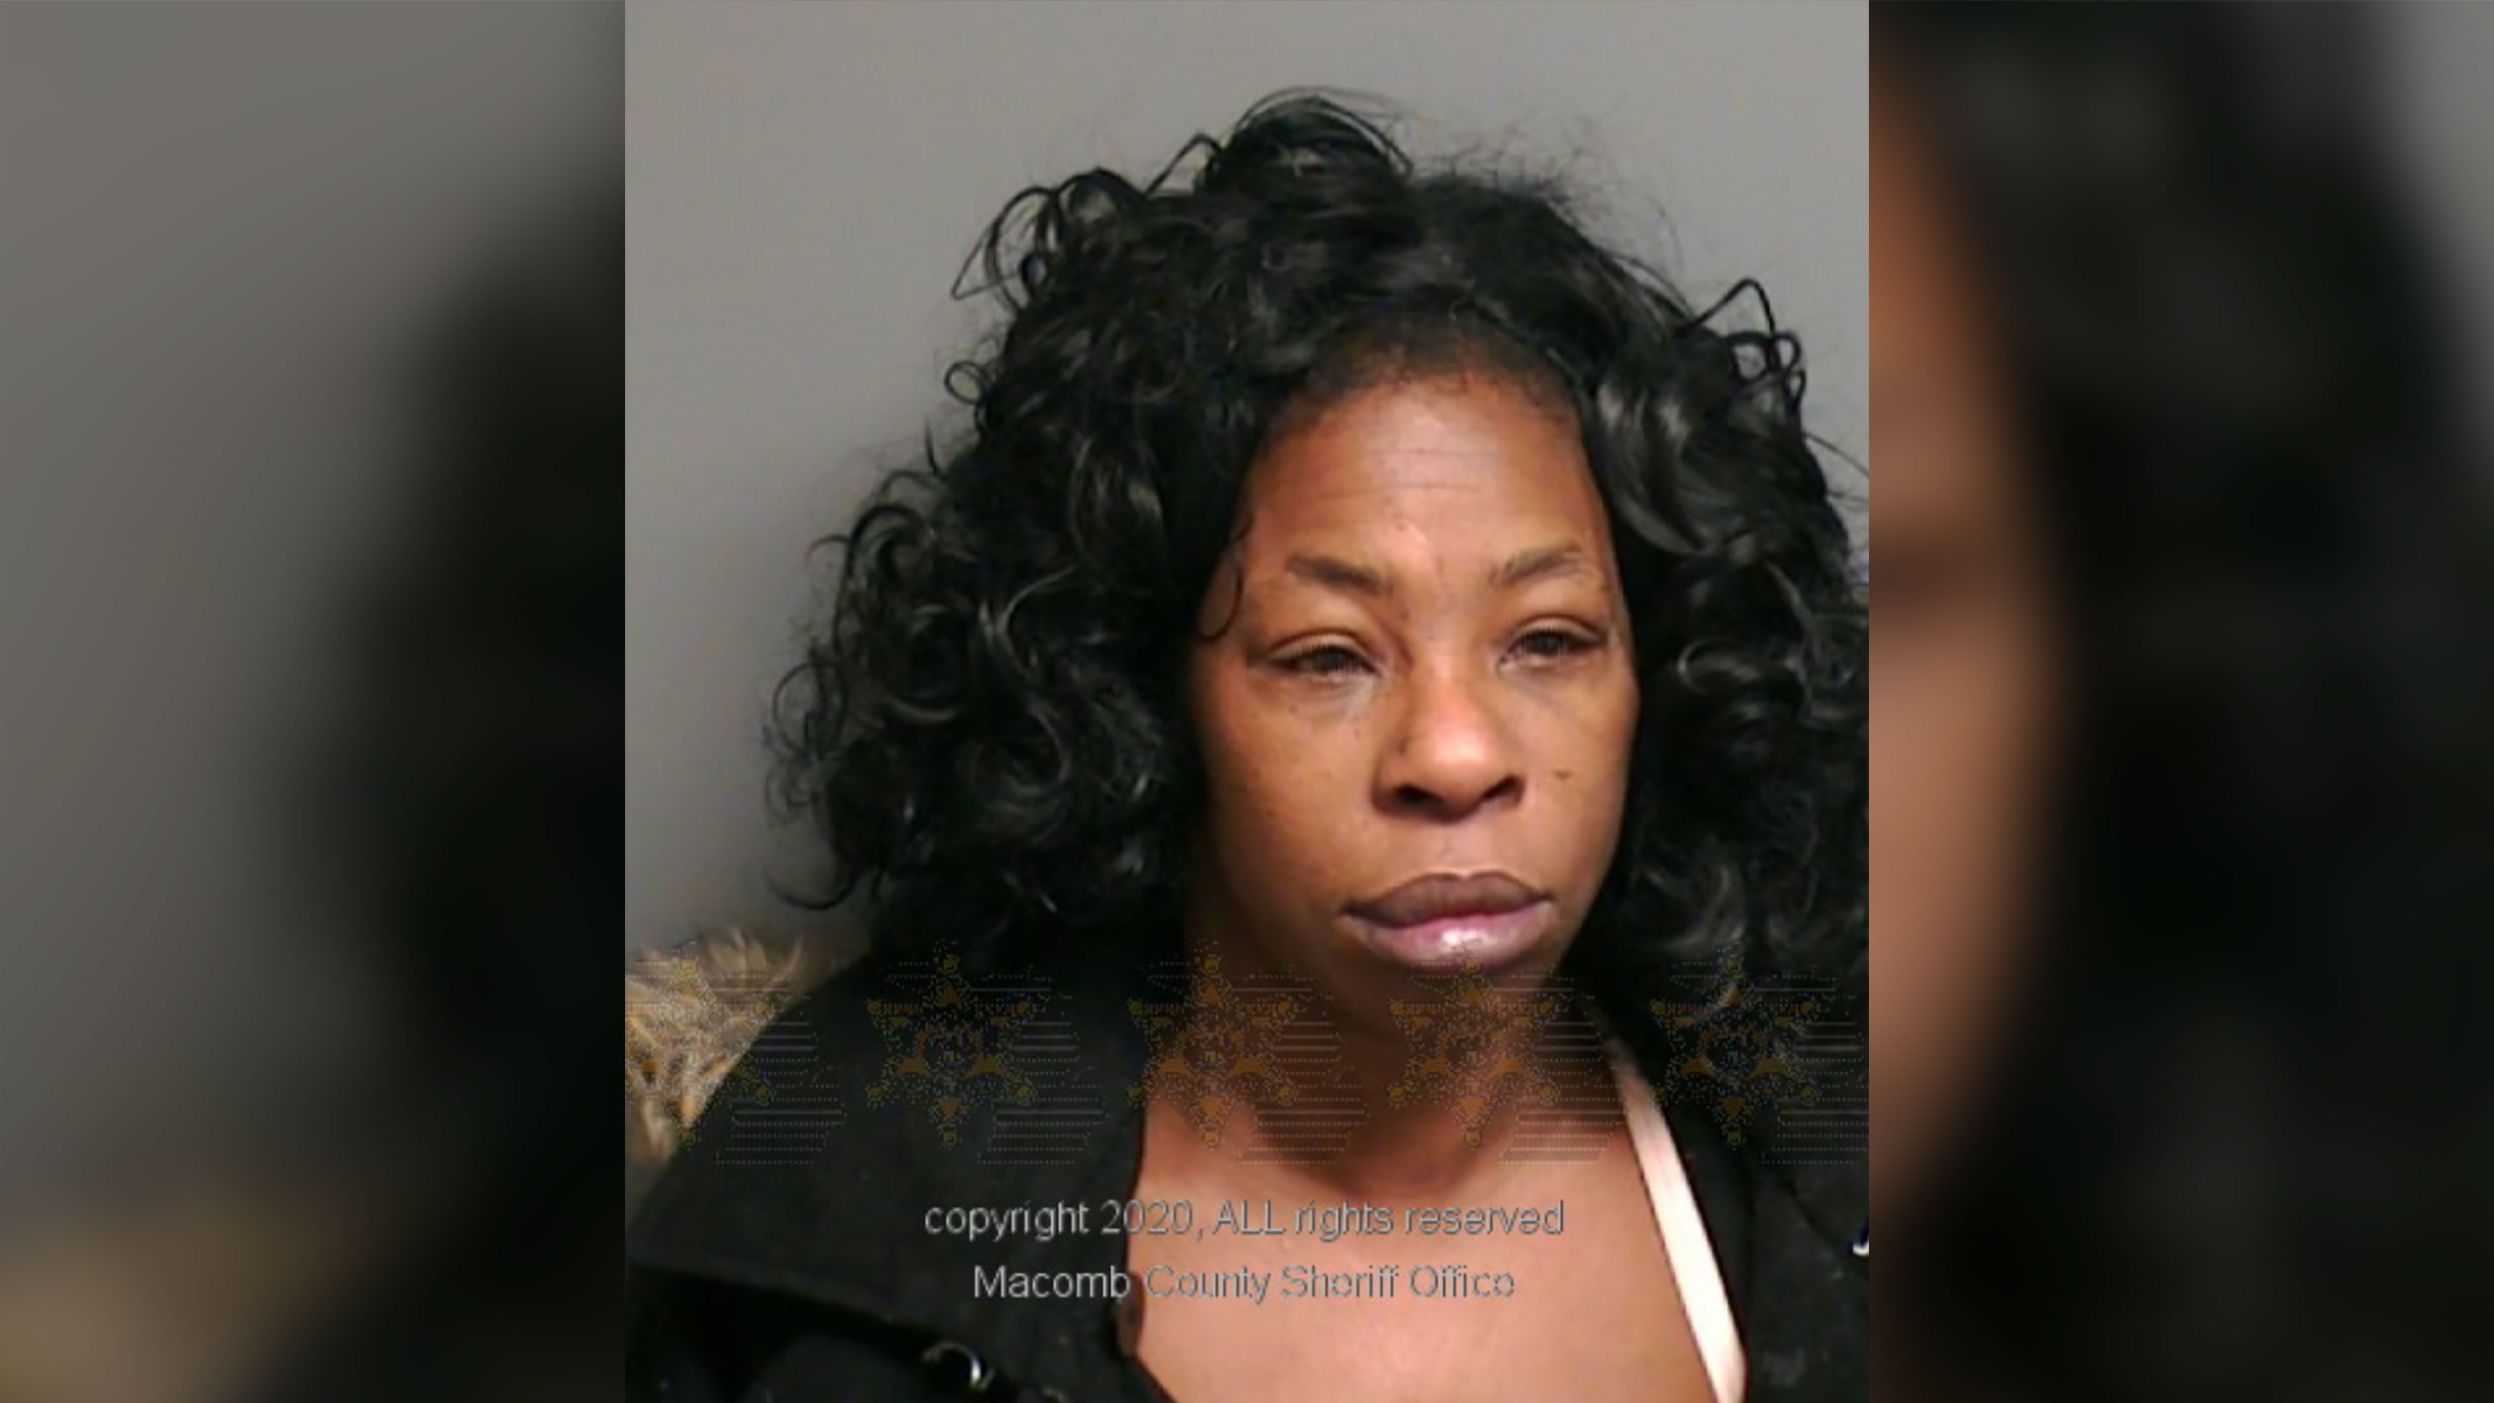 Youlette Wedgeworth, 52, was charged with aggravated assault after police said she bit off a man's tongue while kissing.